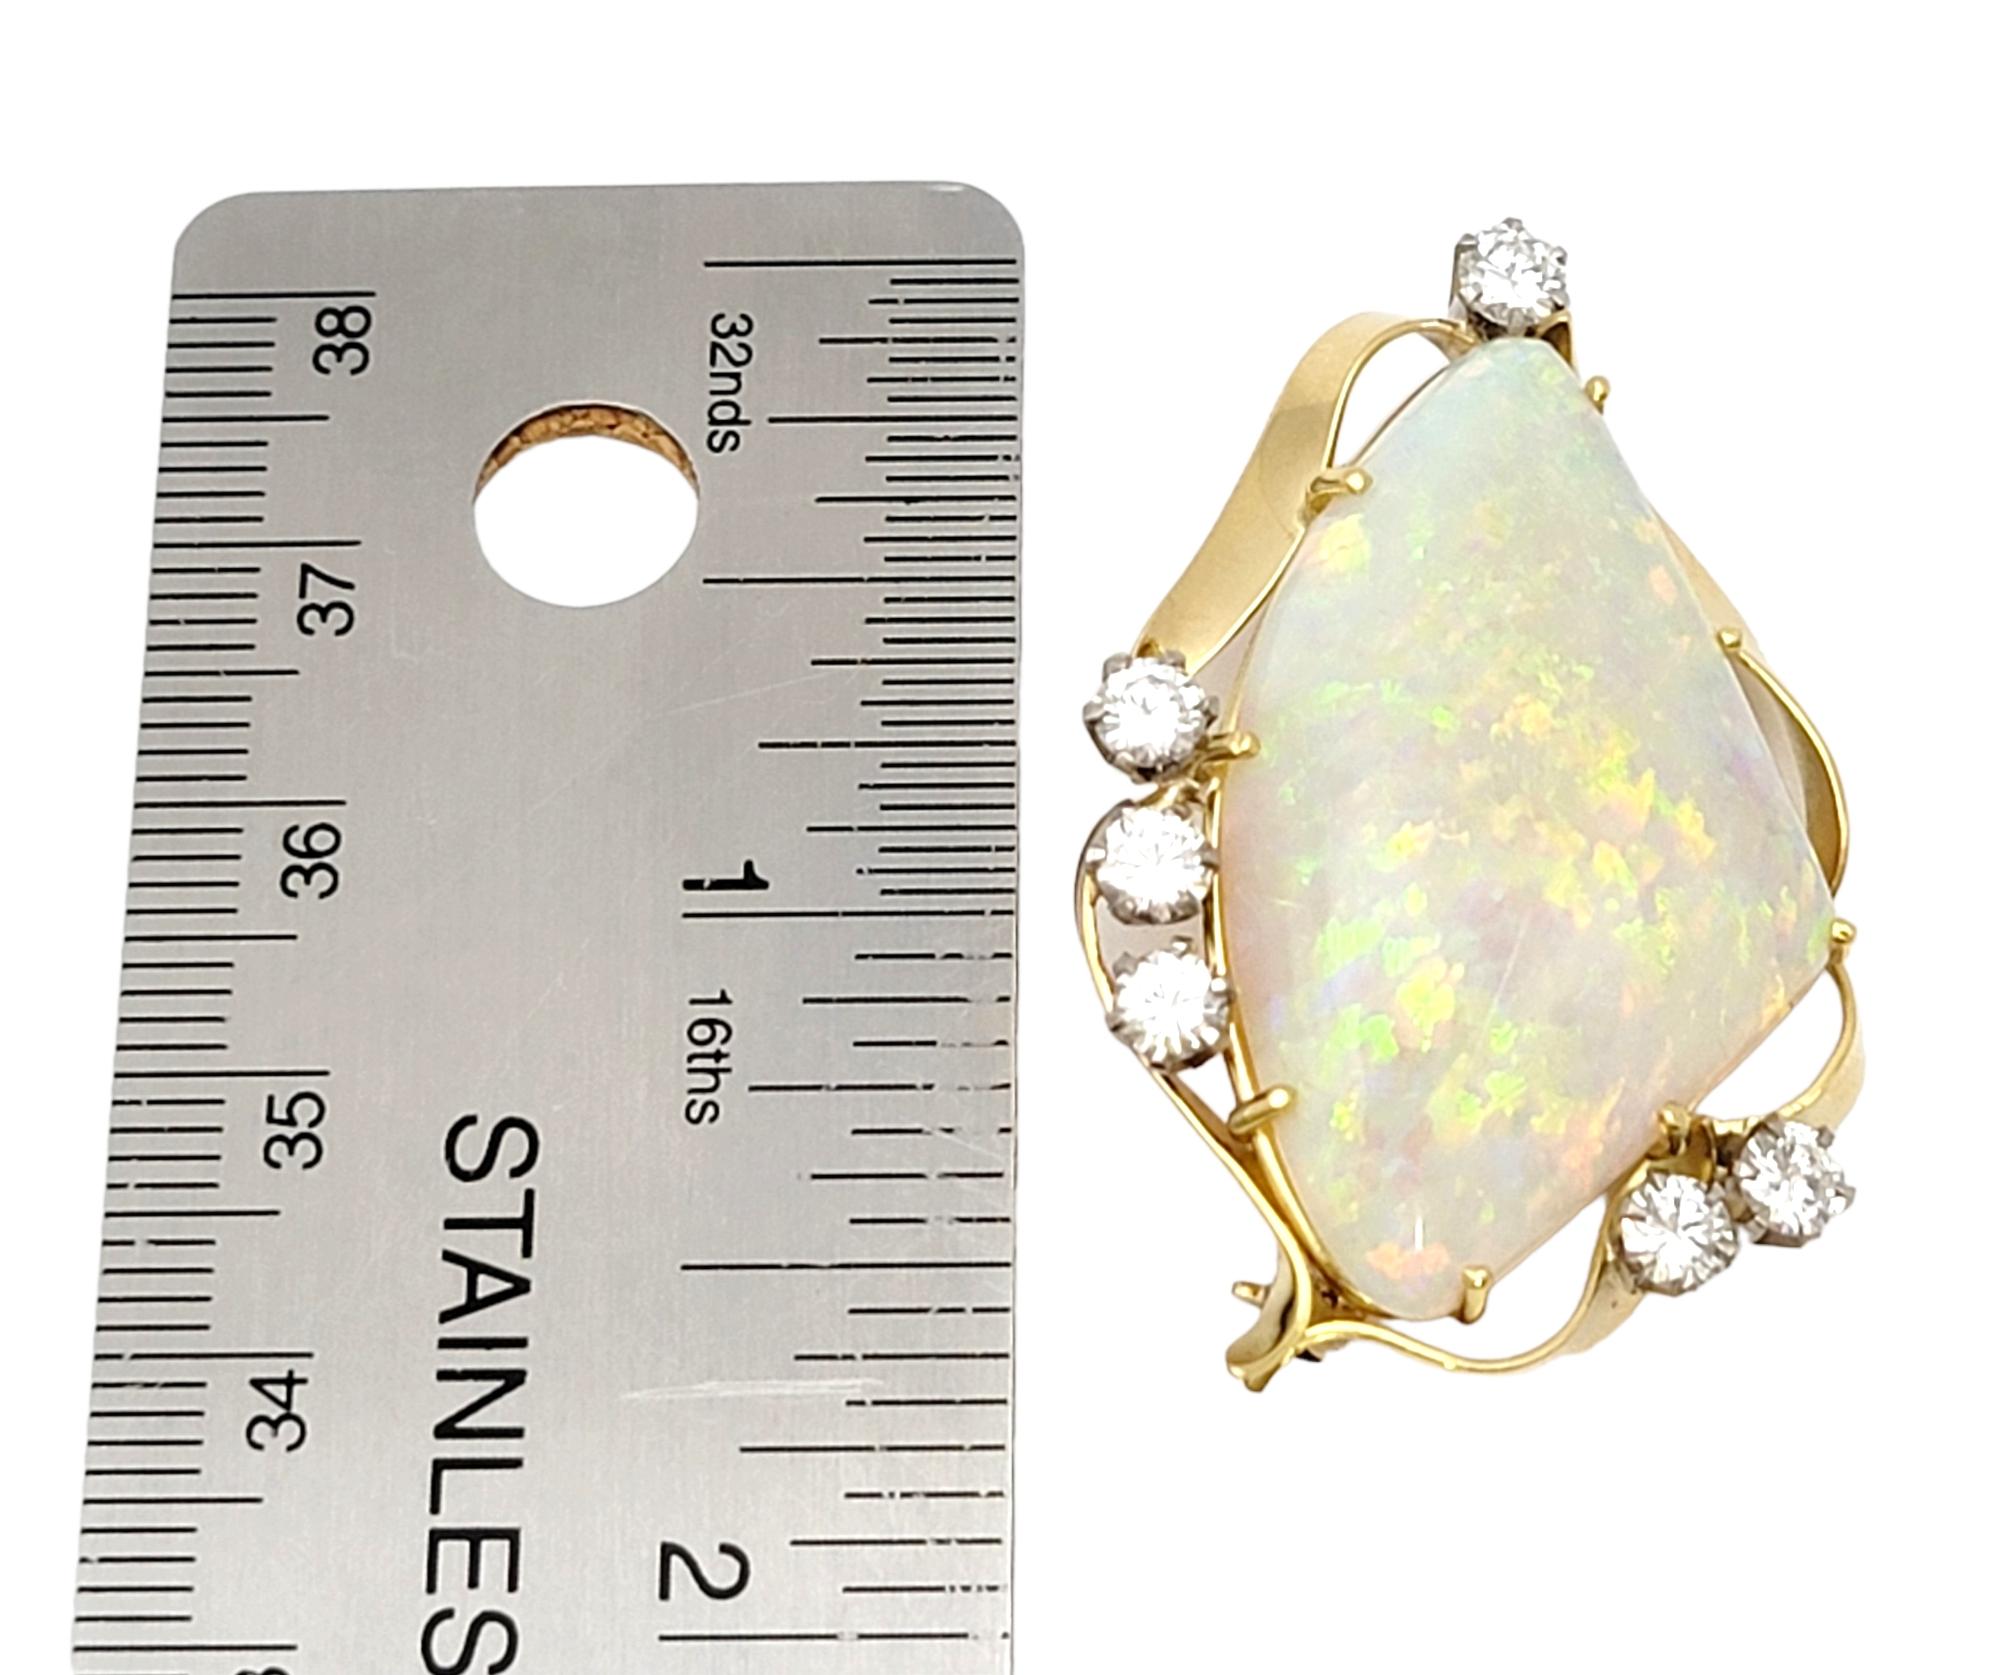 Triangle Cabochon White Opal Brooch / Pendant with Diamonds 18 Karat Yellow Gold For Sale 10